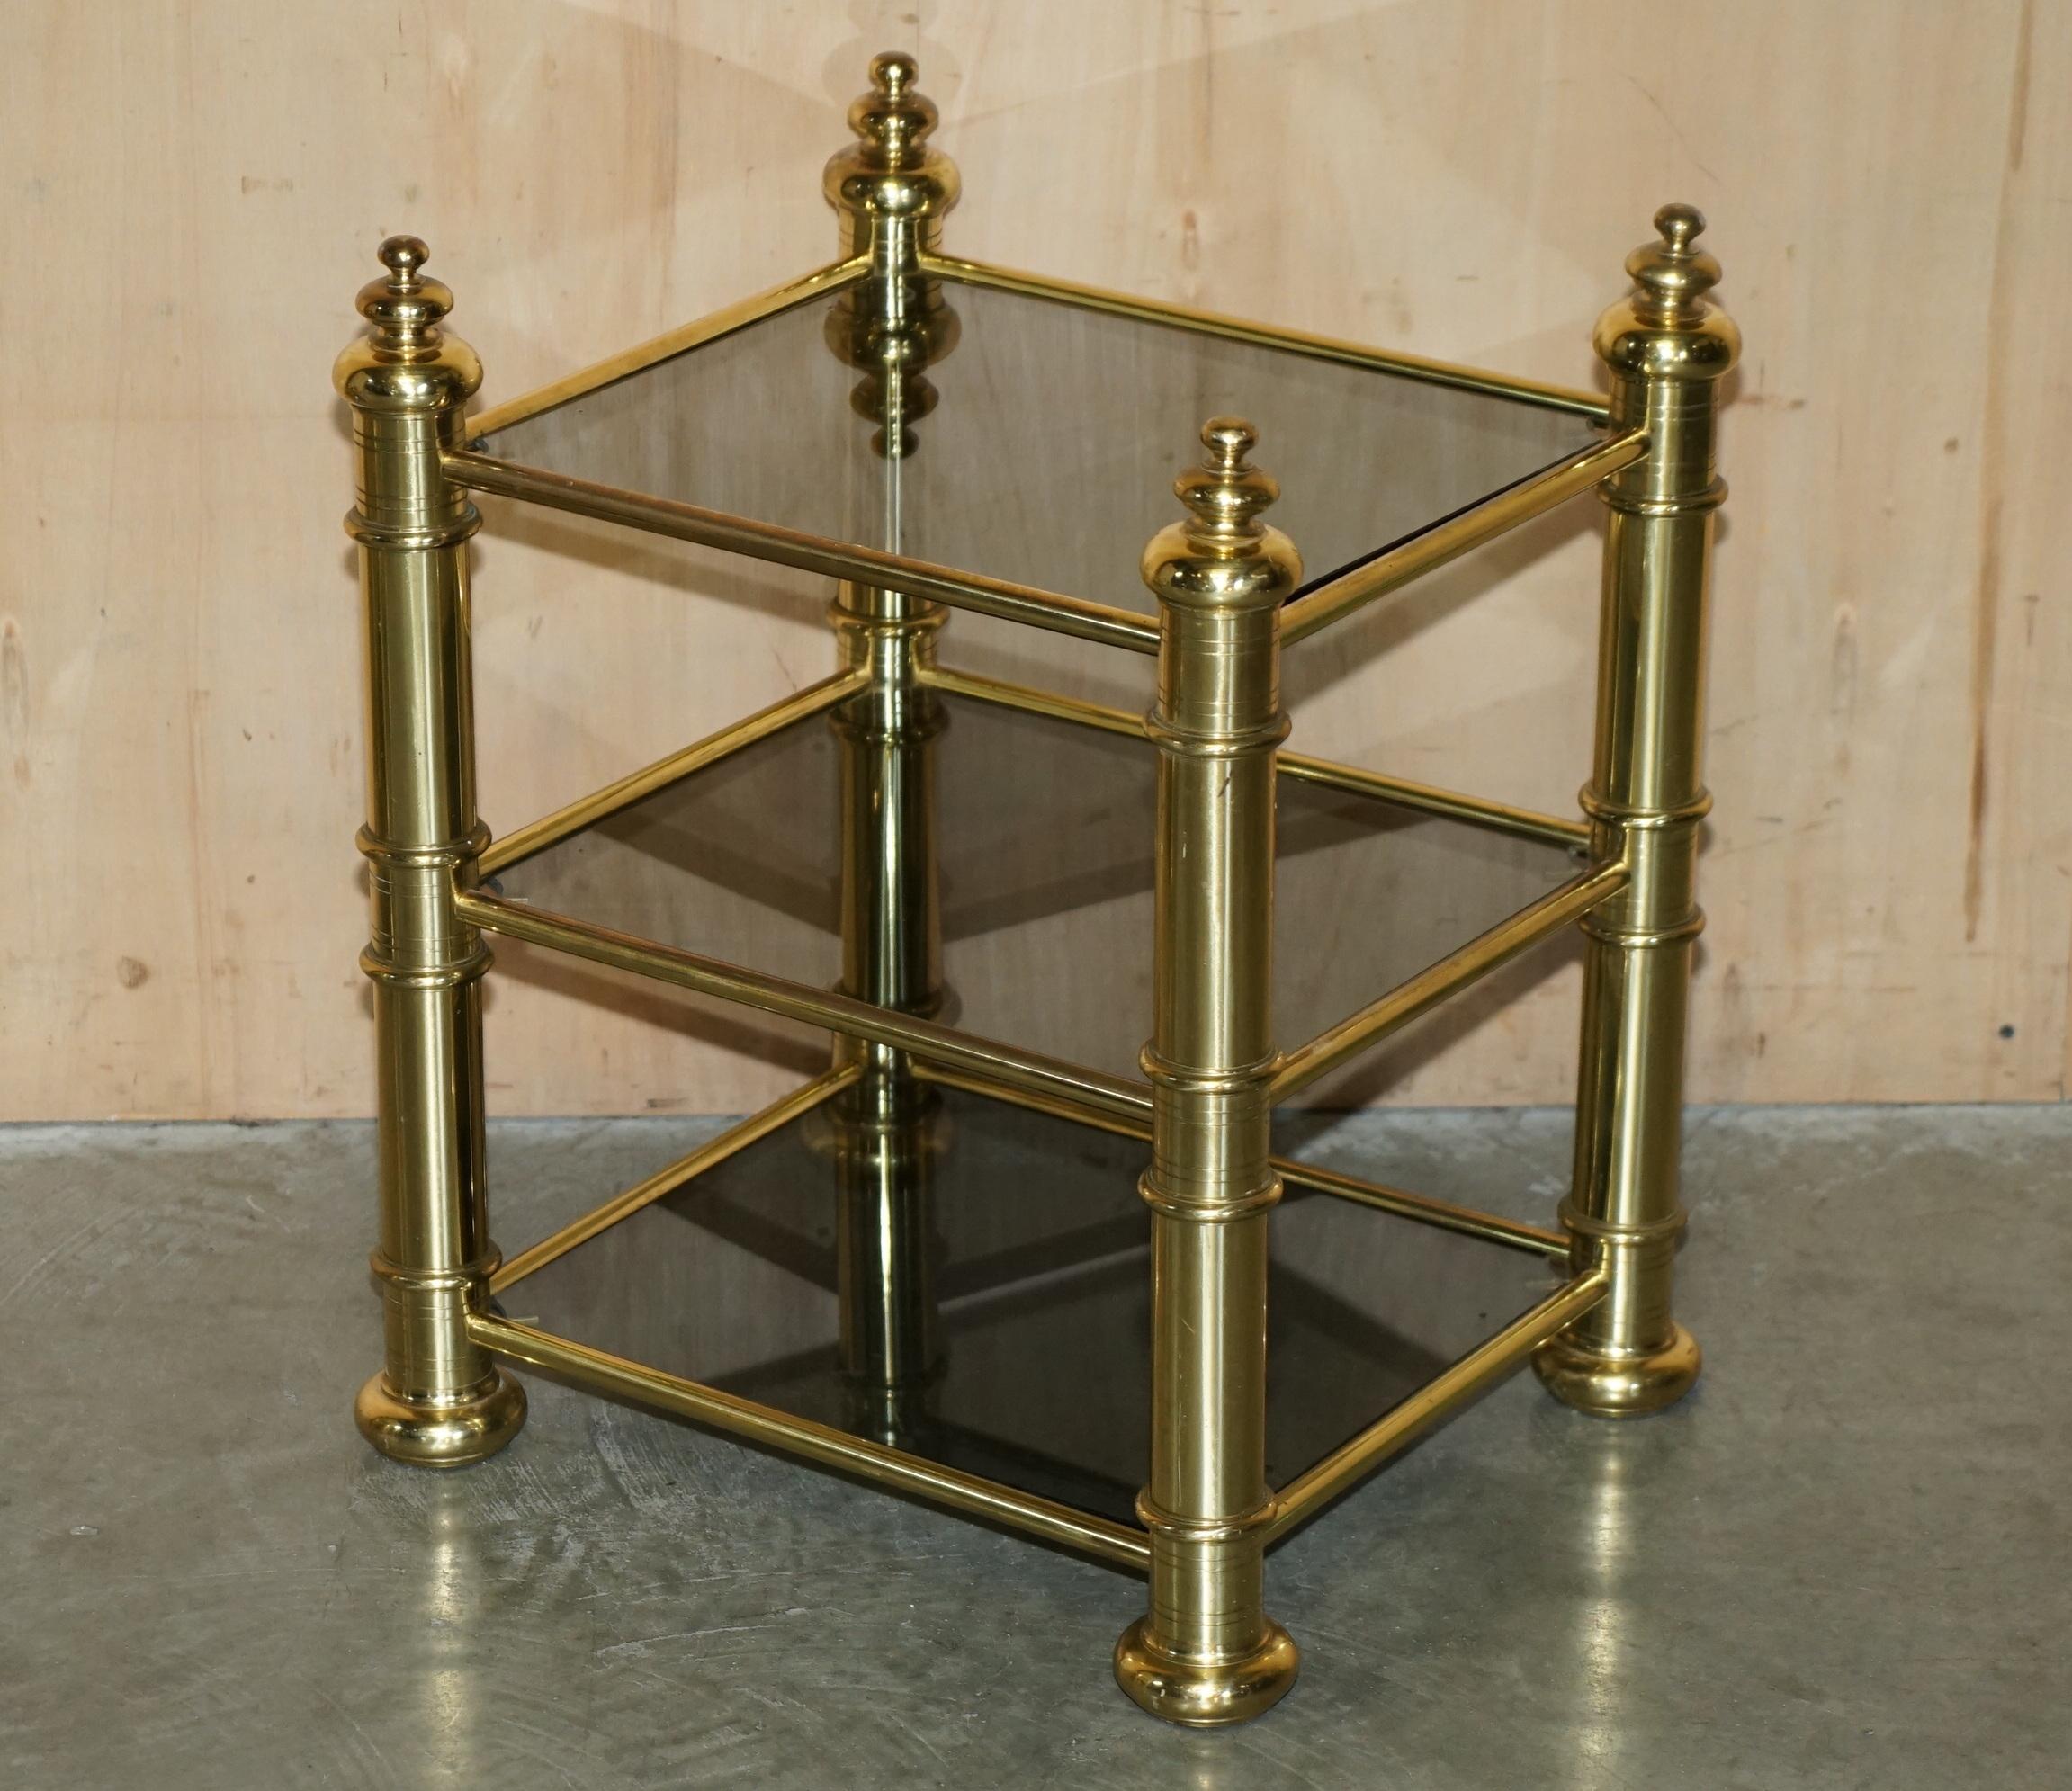 Royal House Antiques

Royal House Antiques is delighted to offer for sale this lovely original pair of circa 1960’s Brass & Smoked glass Etagere side end tables over three tiers  

Please note the delivery fee listed is just a guide, it covers